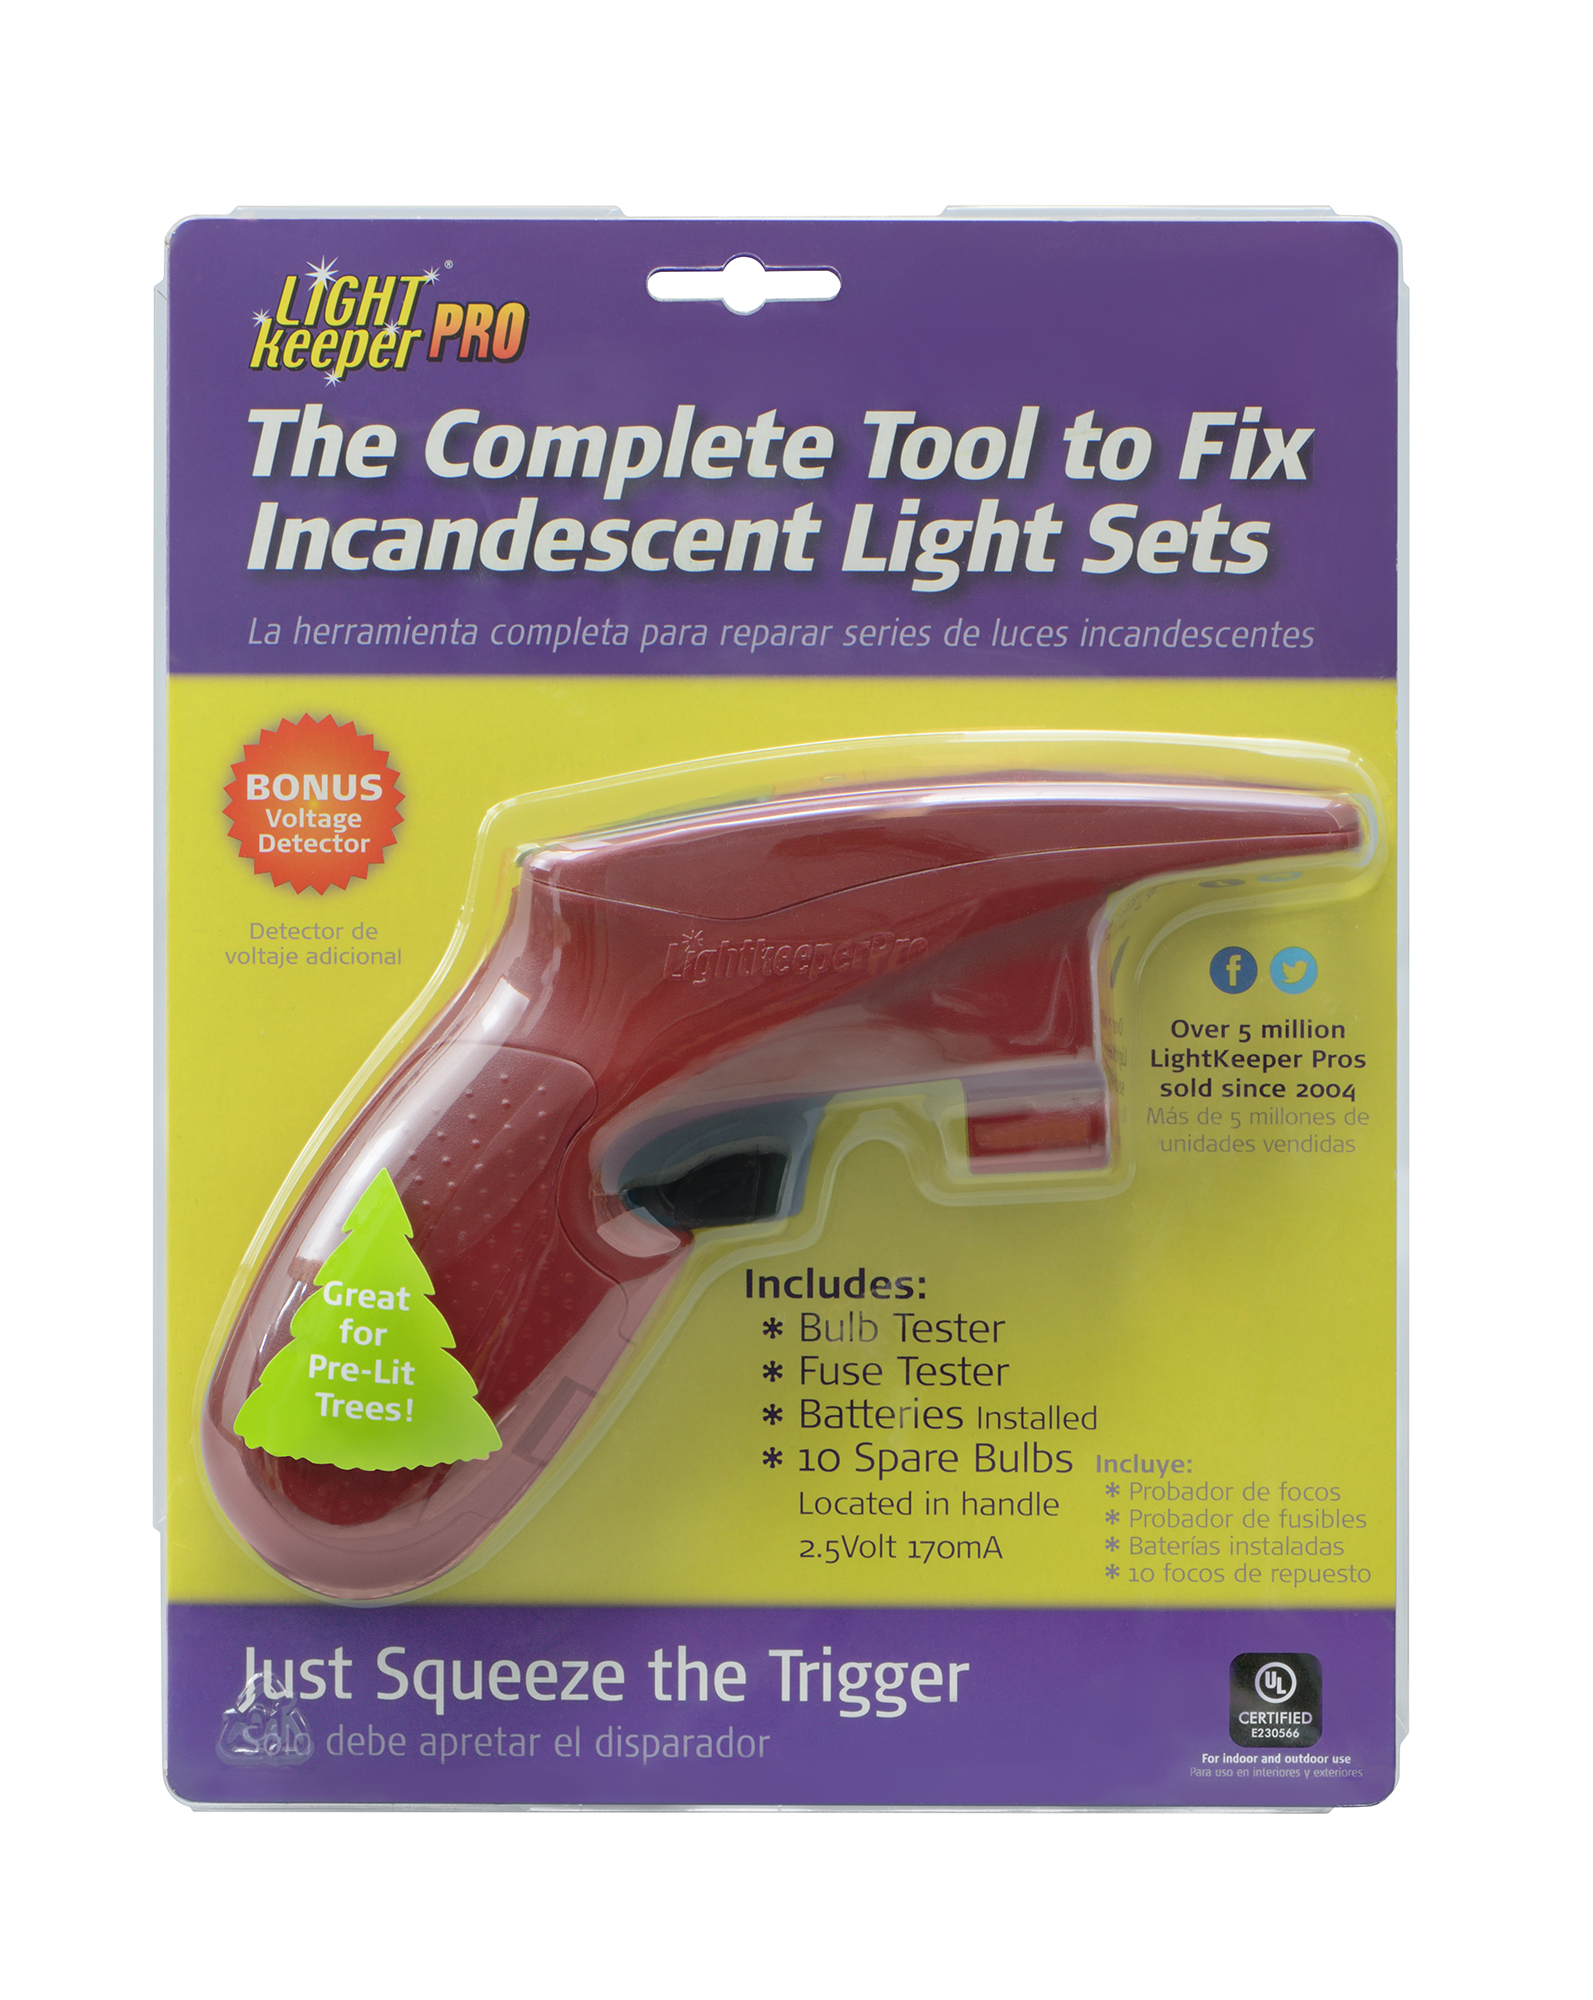 LightKeeper Pro - The Complete Tool for Incandescent Light Set Repair - image 1 of 11